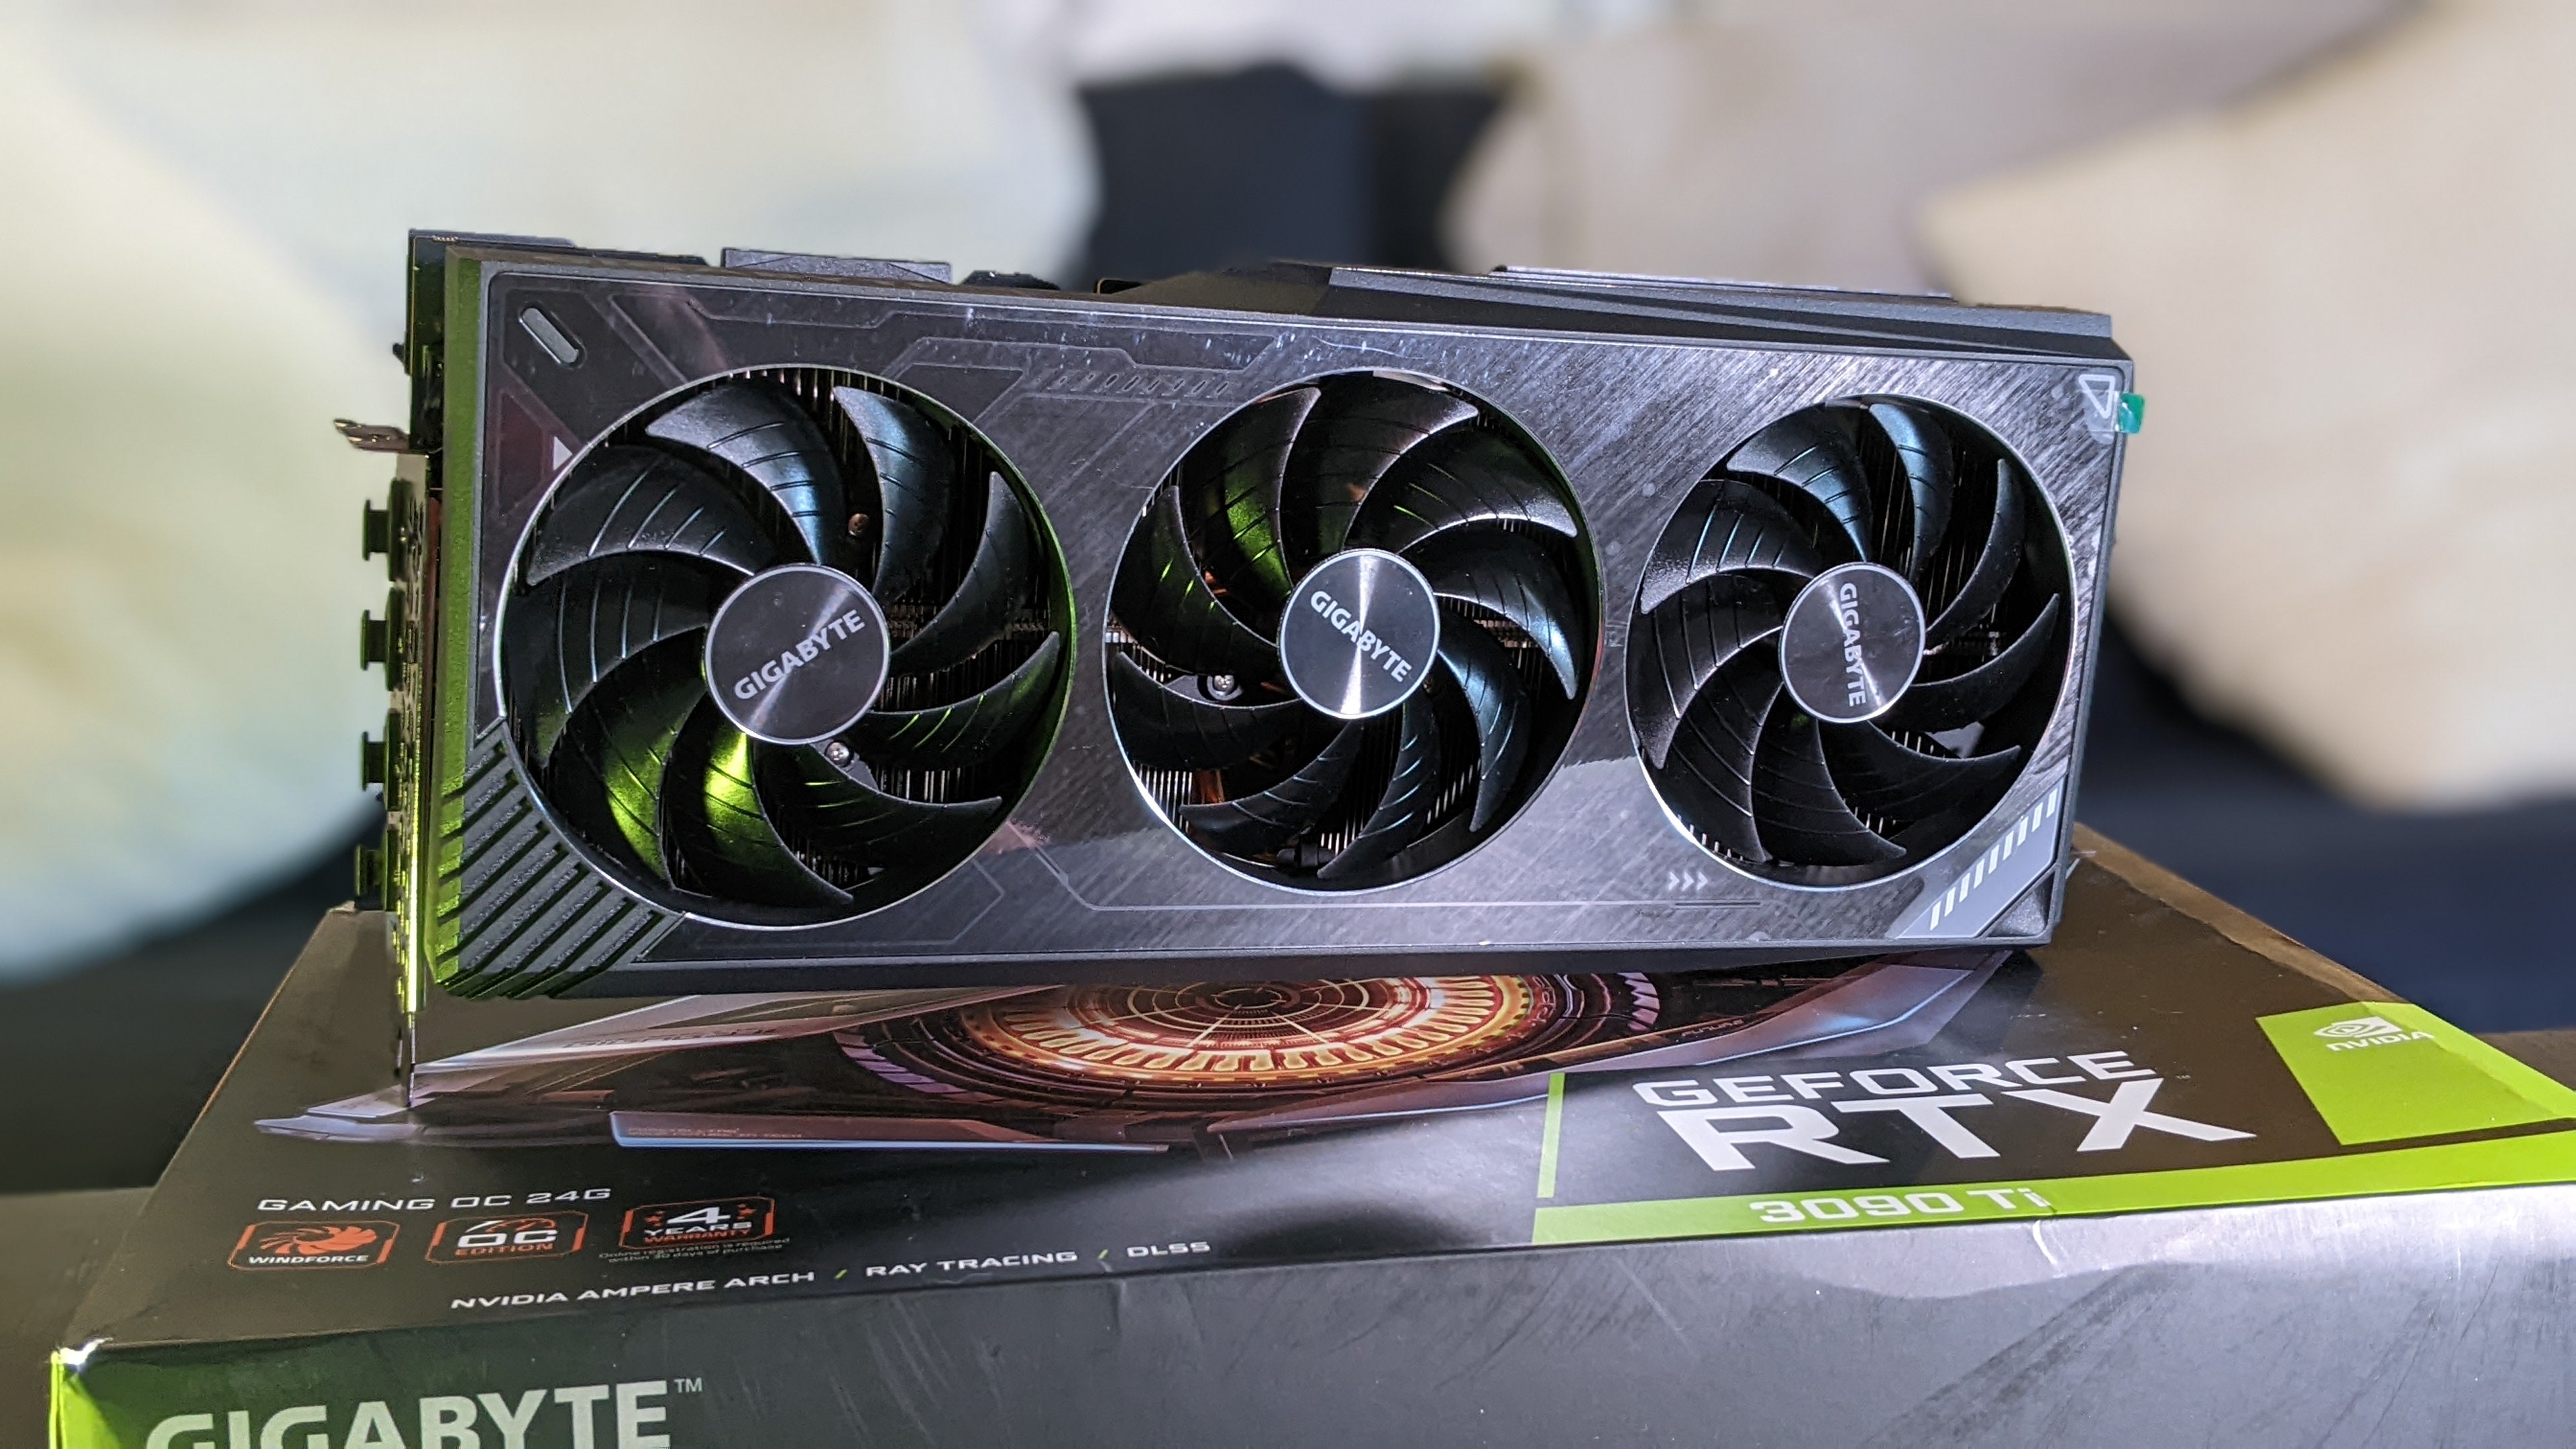 Nvidia’s latest graphics cards redefine gaming graphics standards